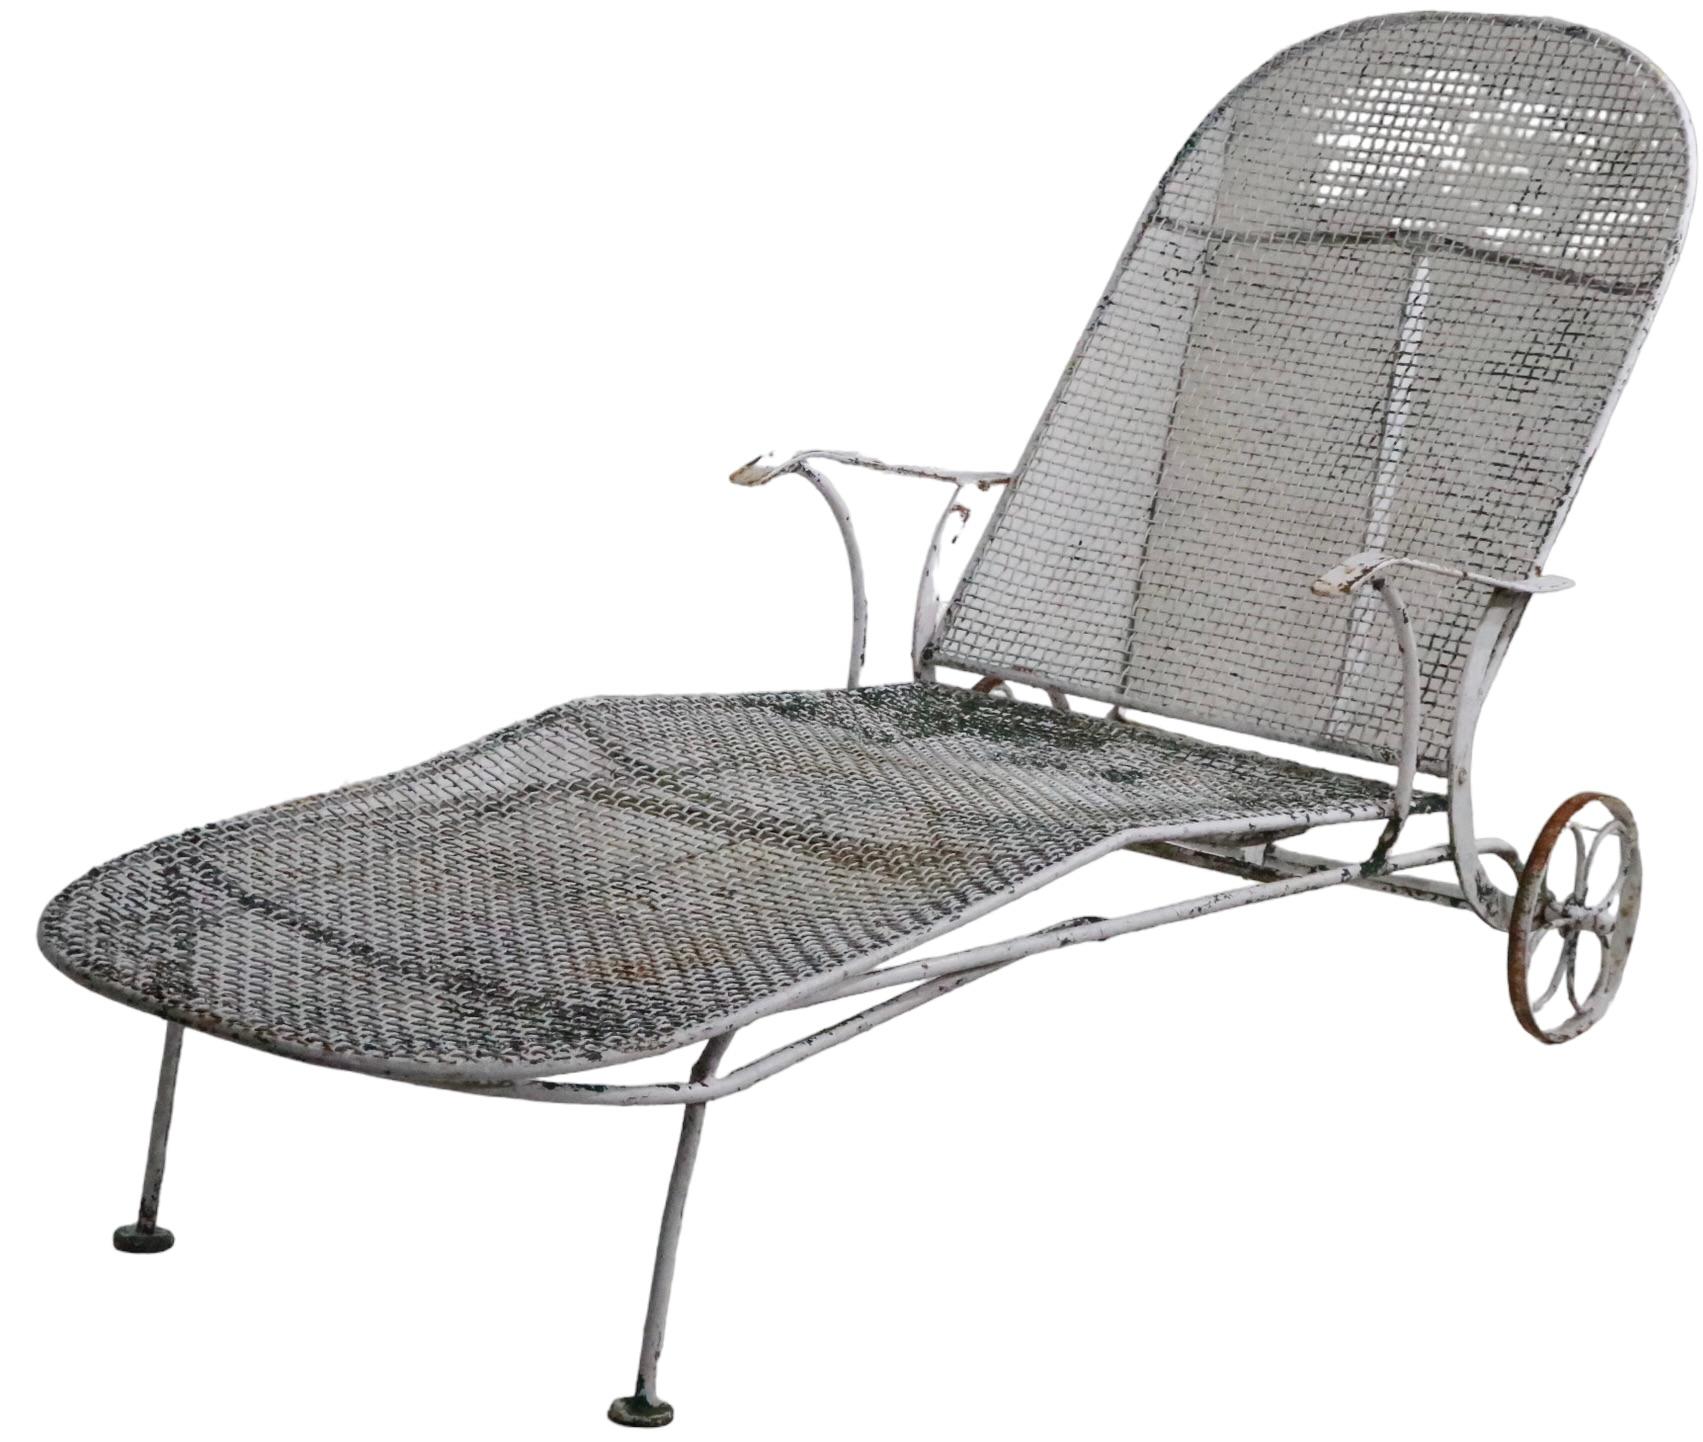 Stylish Mid Century wrought iron and metal mesh adjustable chaise lounge by Woodard Furniture. The chaise was designed as part of the highly sought after Sculptura Line, circa 1950. The lounge features  an adjustable back rest, which has four